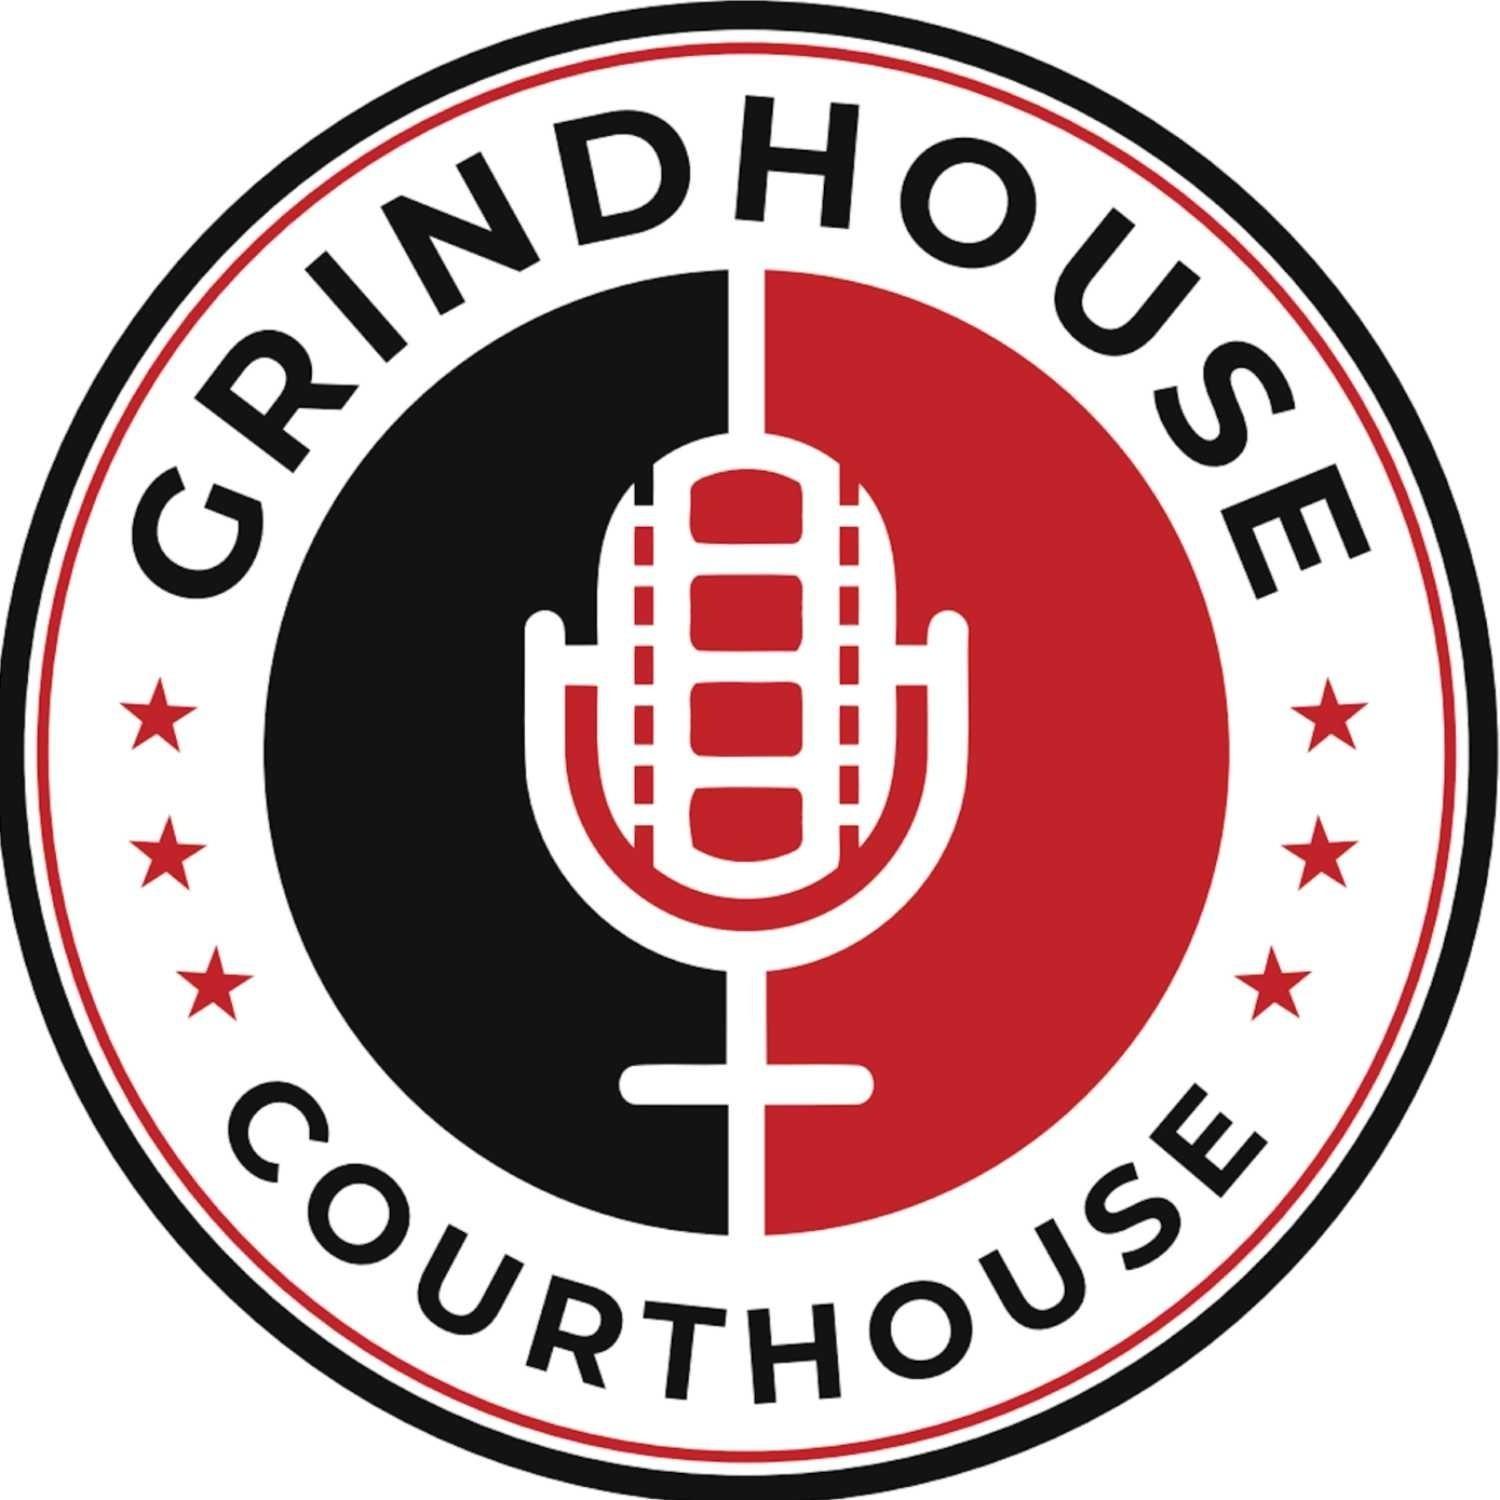 Grindhouse Courthouse Podcast